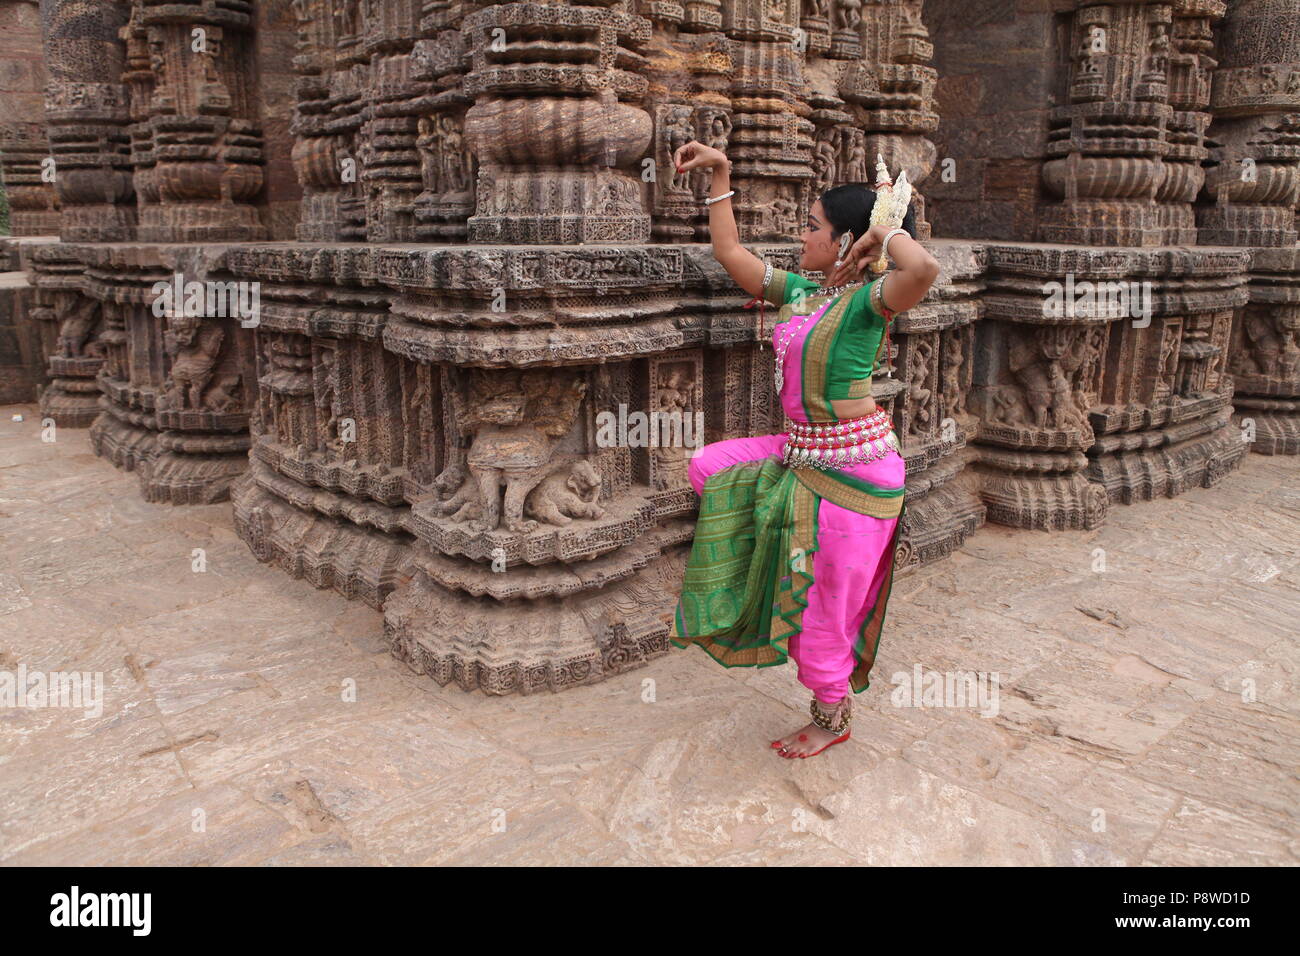 odissi is one of the eight classical dance forms of india,from the state of odisha.here the dancer poses before temples with sculptures Stock Photo